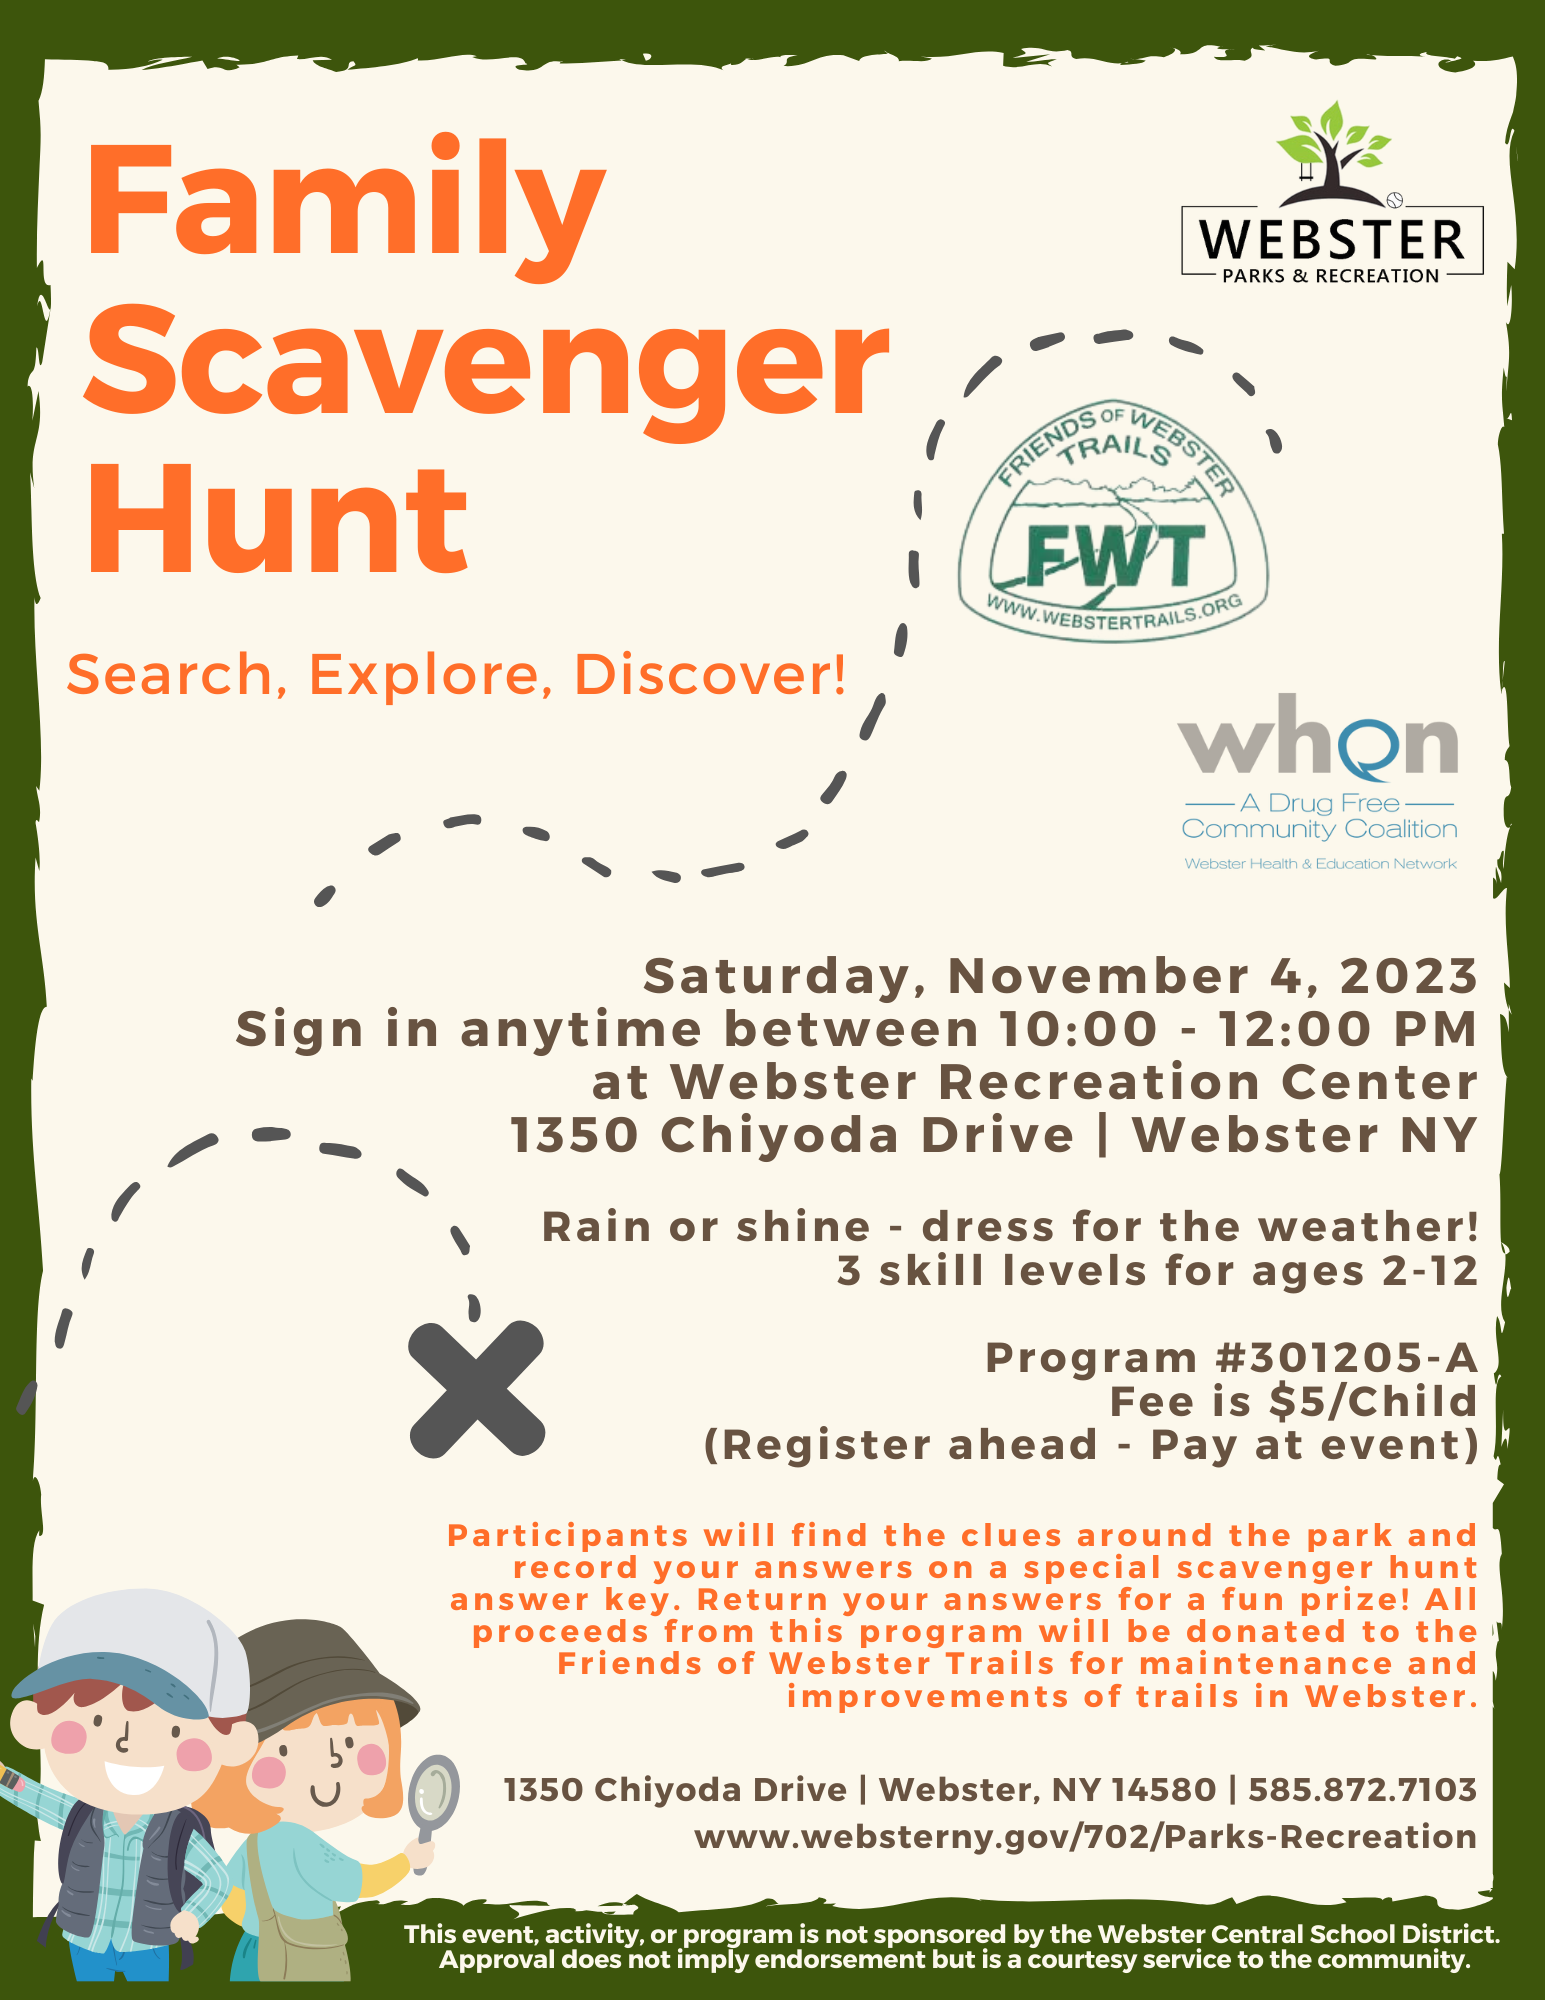 A handout flyer for the Family Scavenger Hunt.